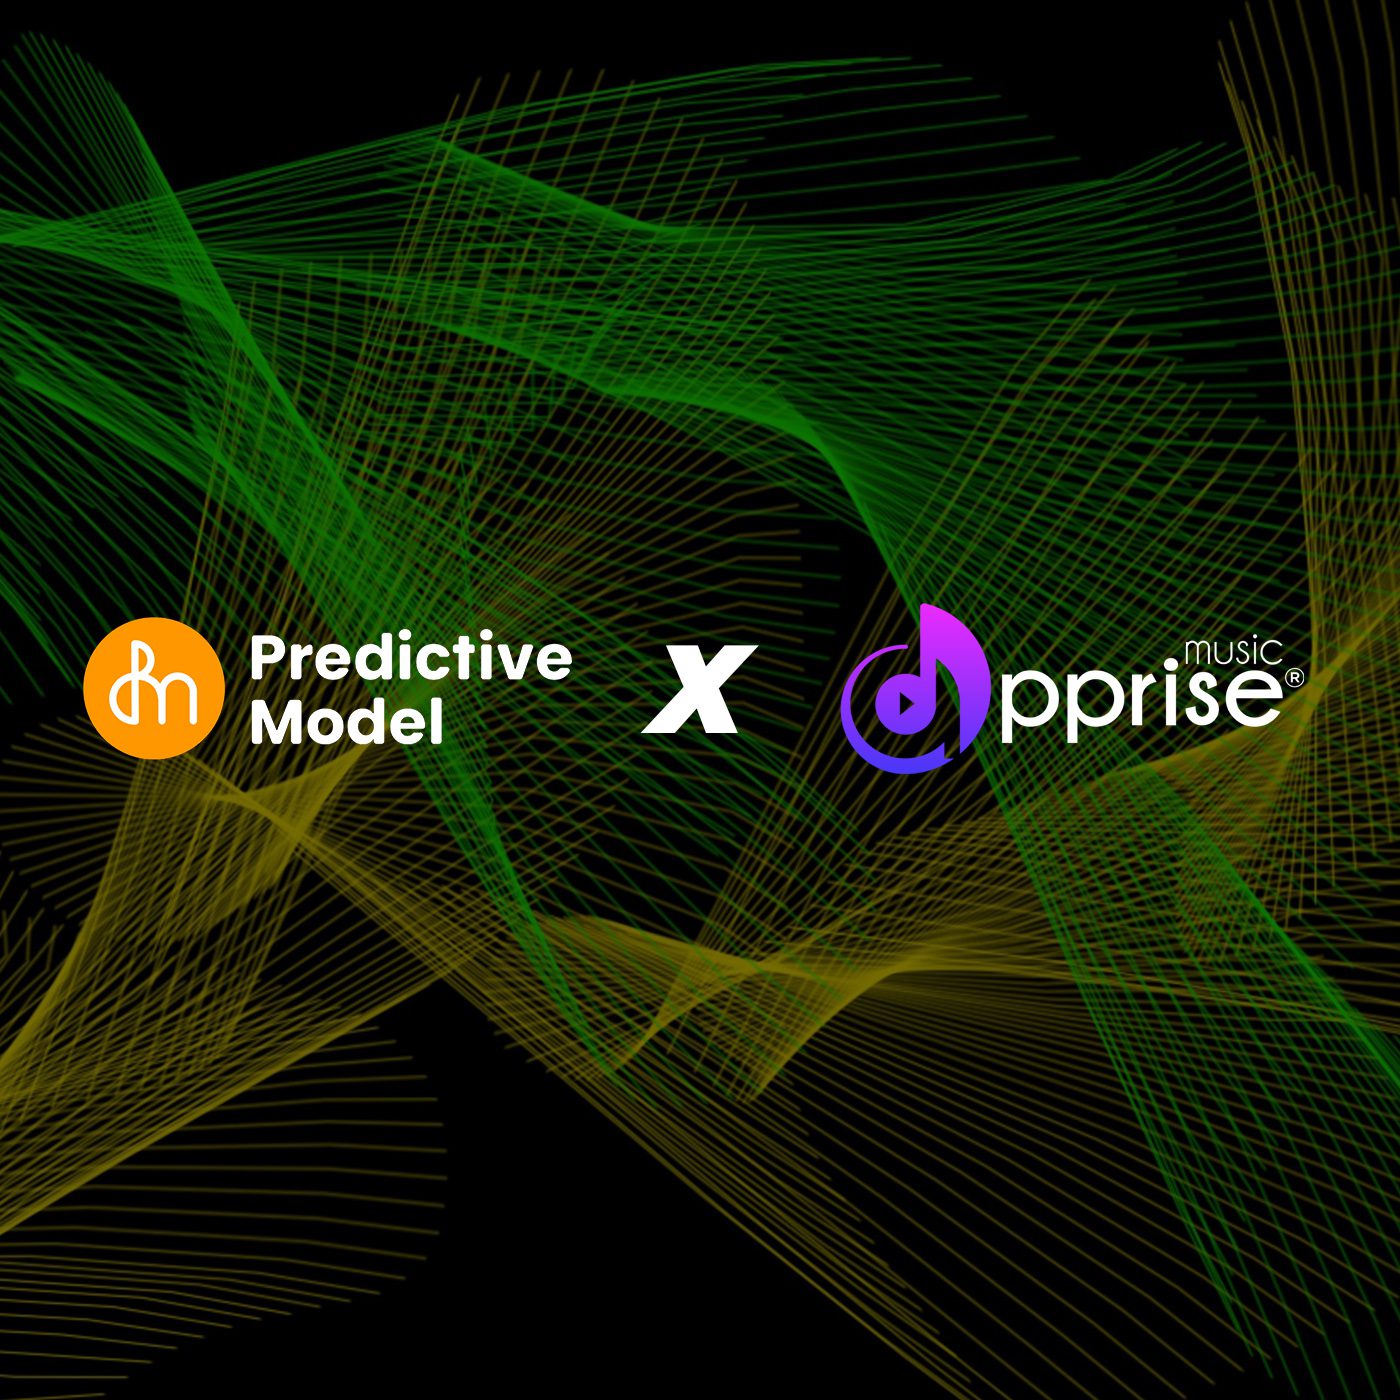 Apprise Music Collaborates With China's Tencent Music Entertainment Group To Promote African Music Using PDM AI Technology (Predictive Model).